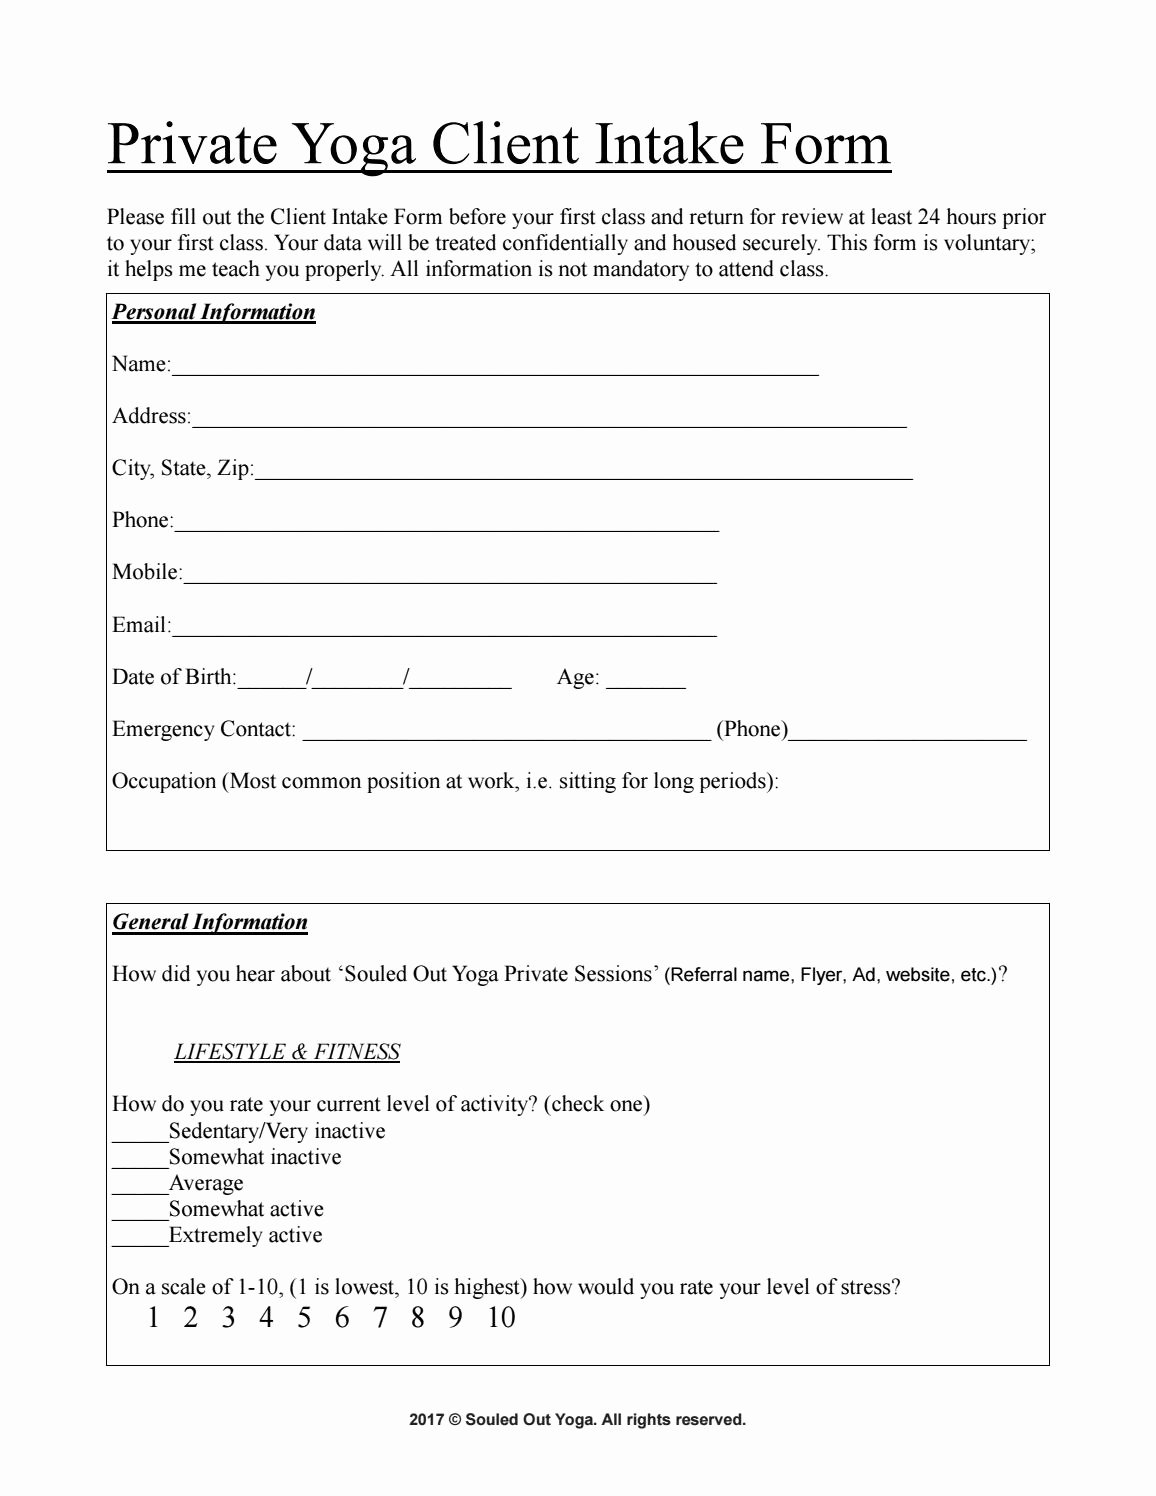 Private Yoga Client Intake form by souledoutyoga issuu